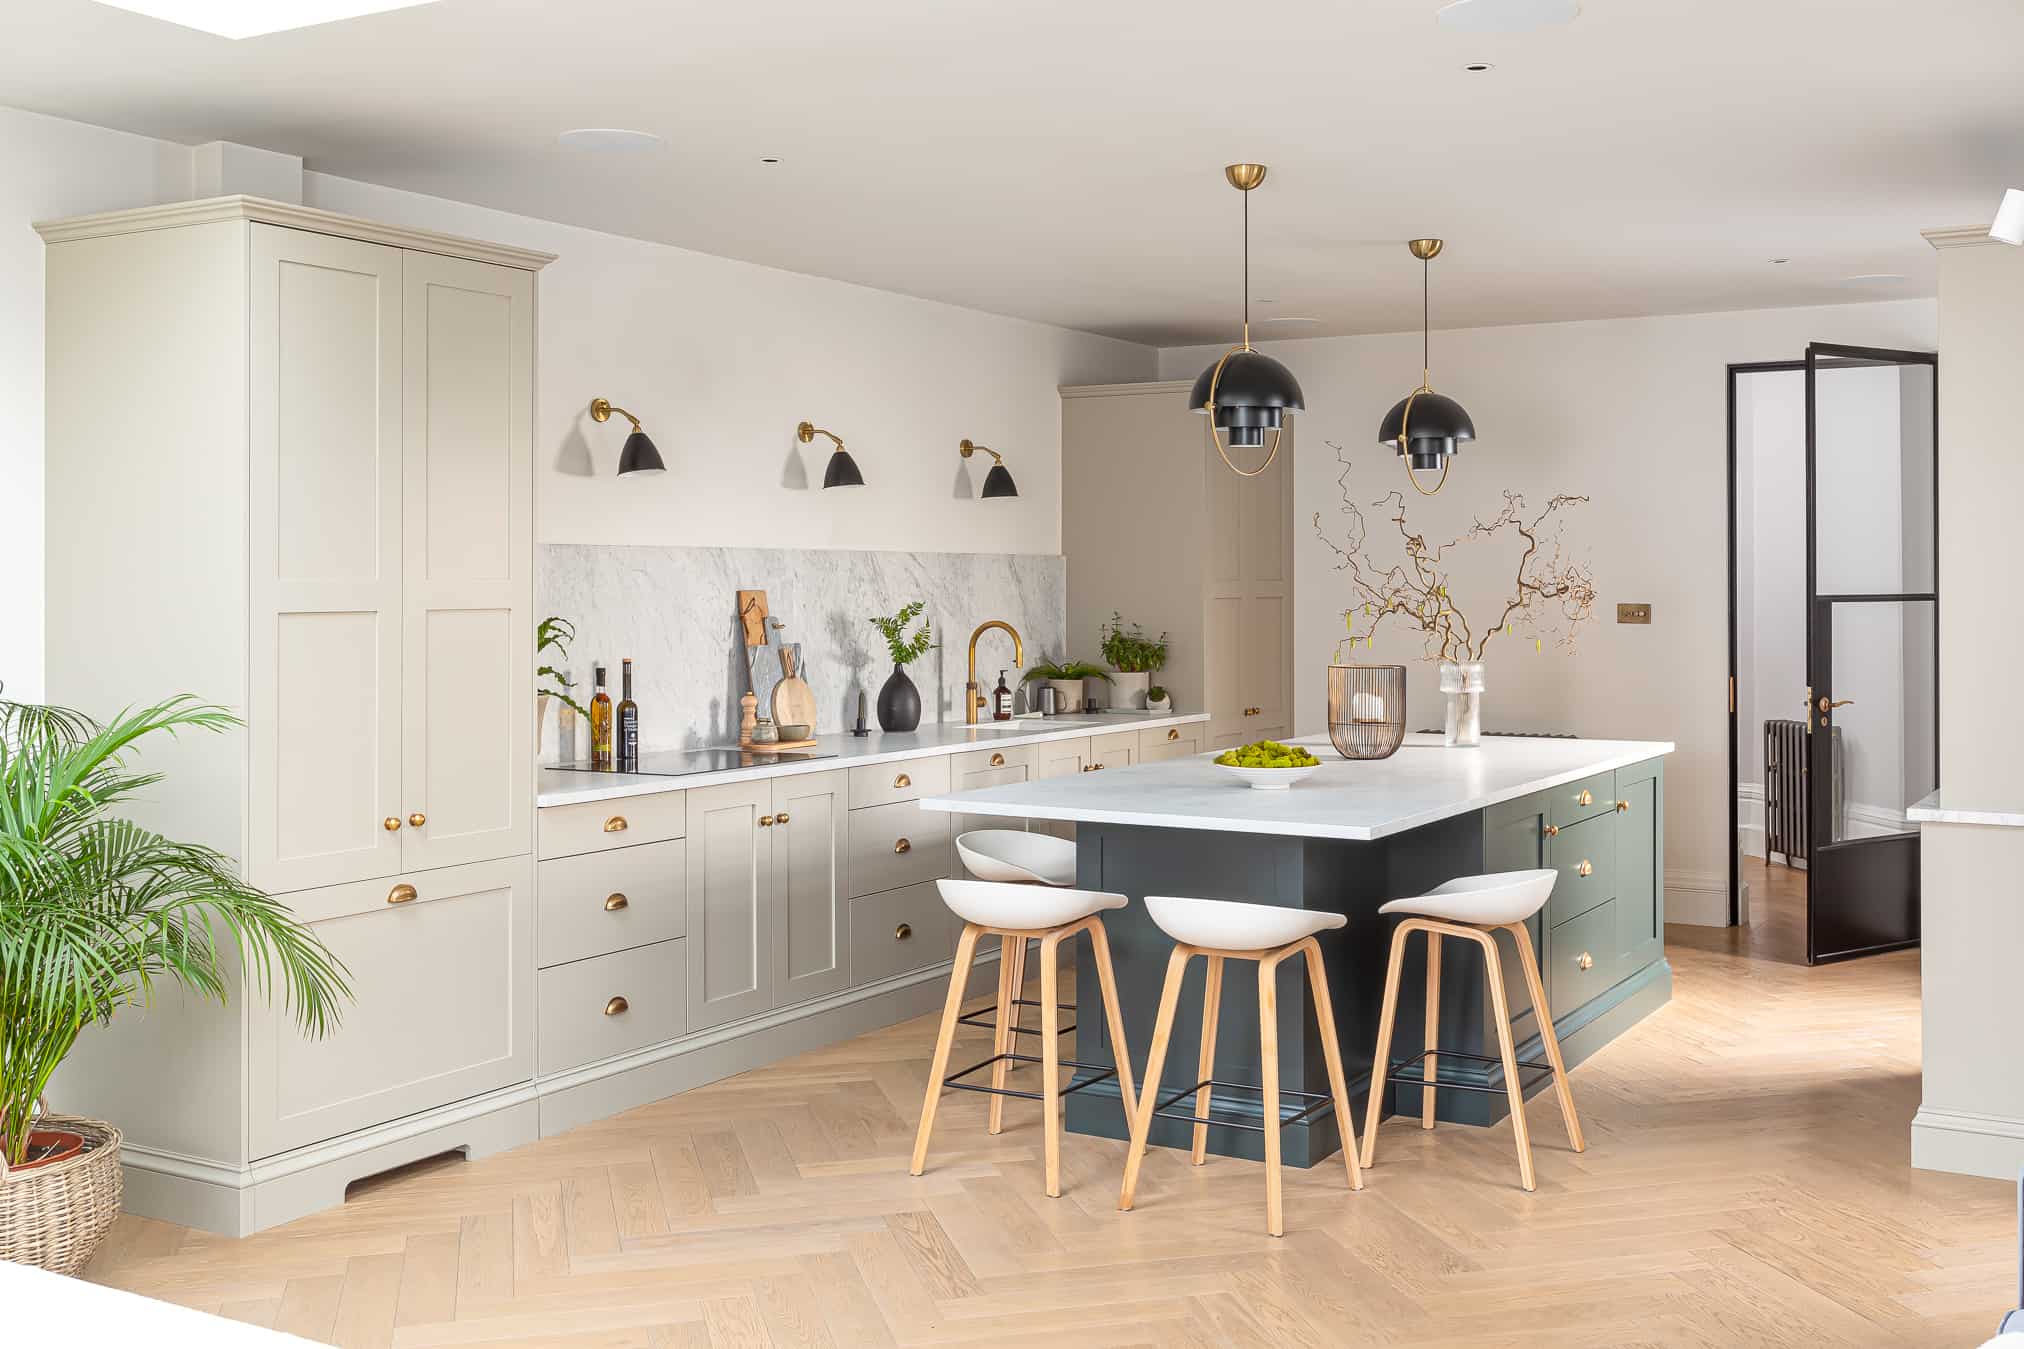 John Lewis of Hungerford luxury Shaker kitchen with green island and parquet chevron flooring with grey cabinetry